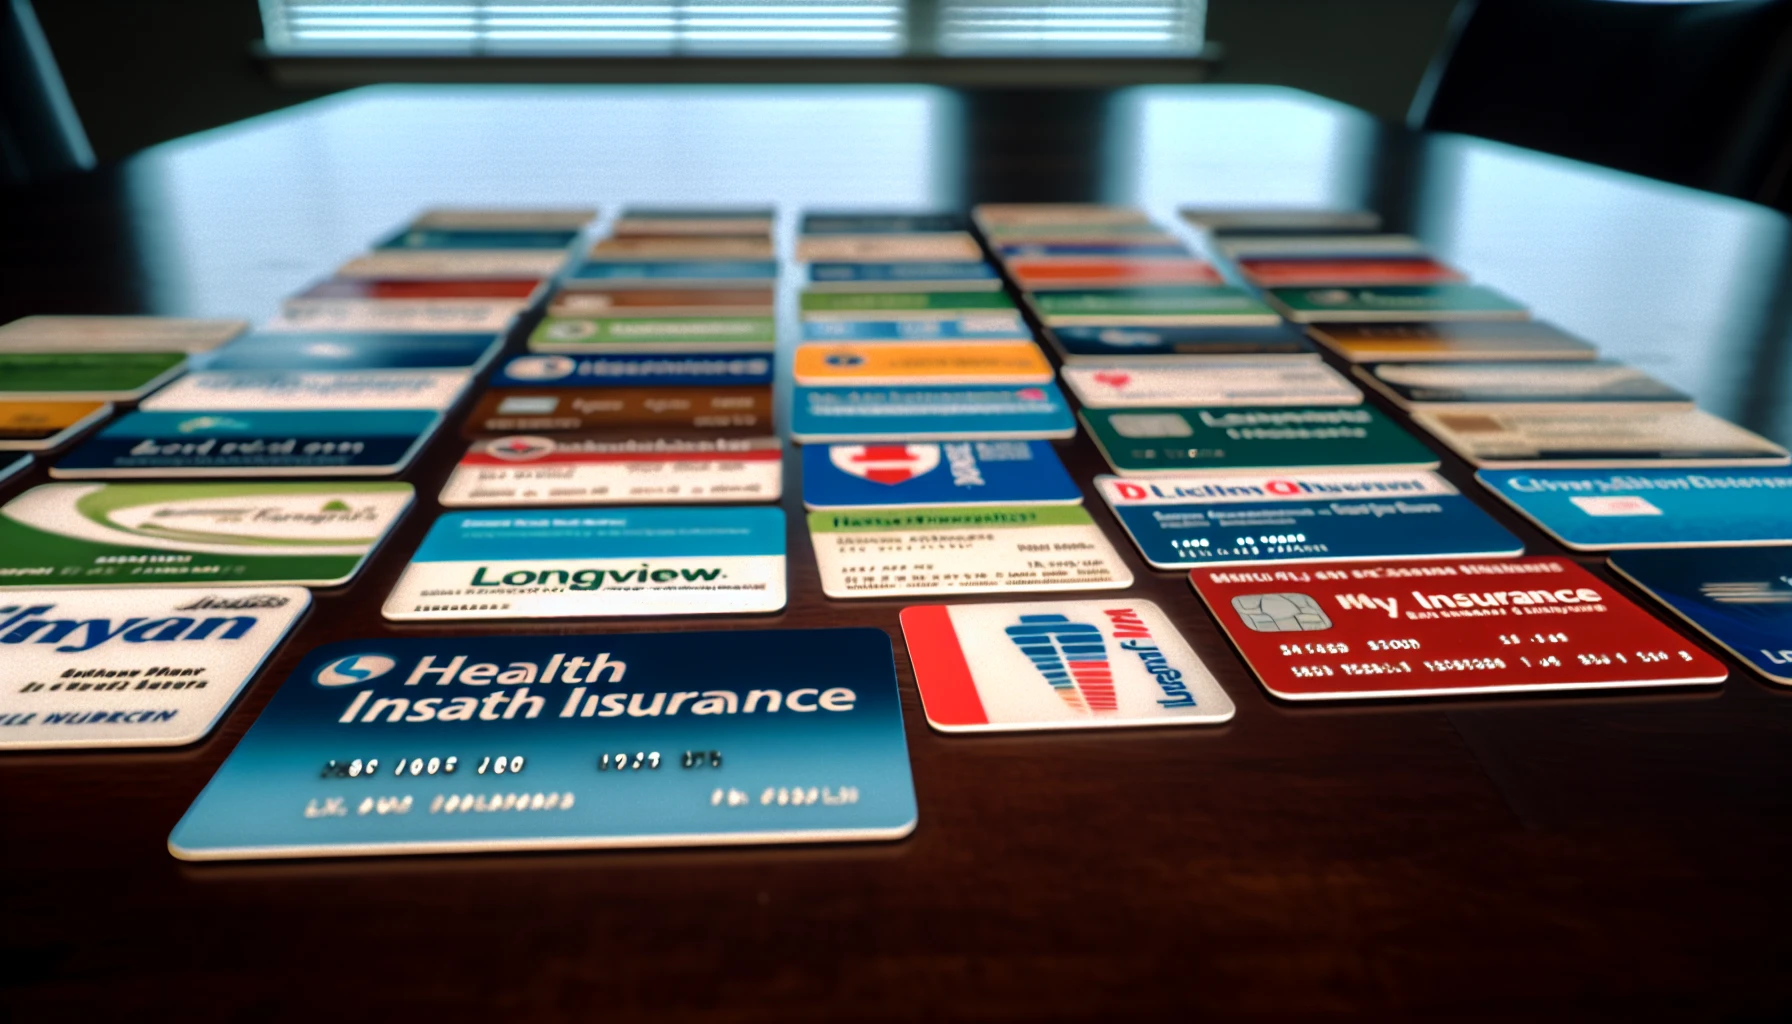 An array of health insurance cards representing different insurance options for Longview employees